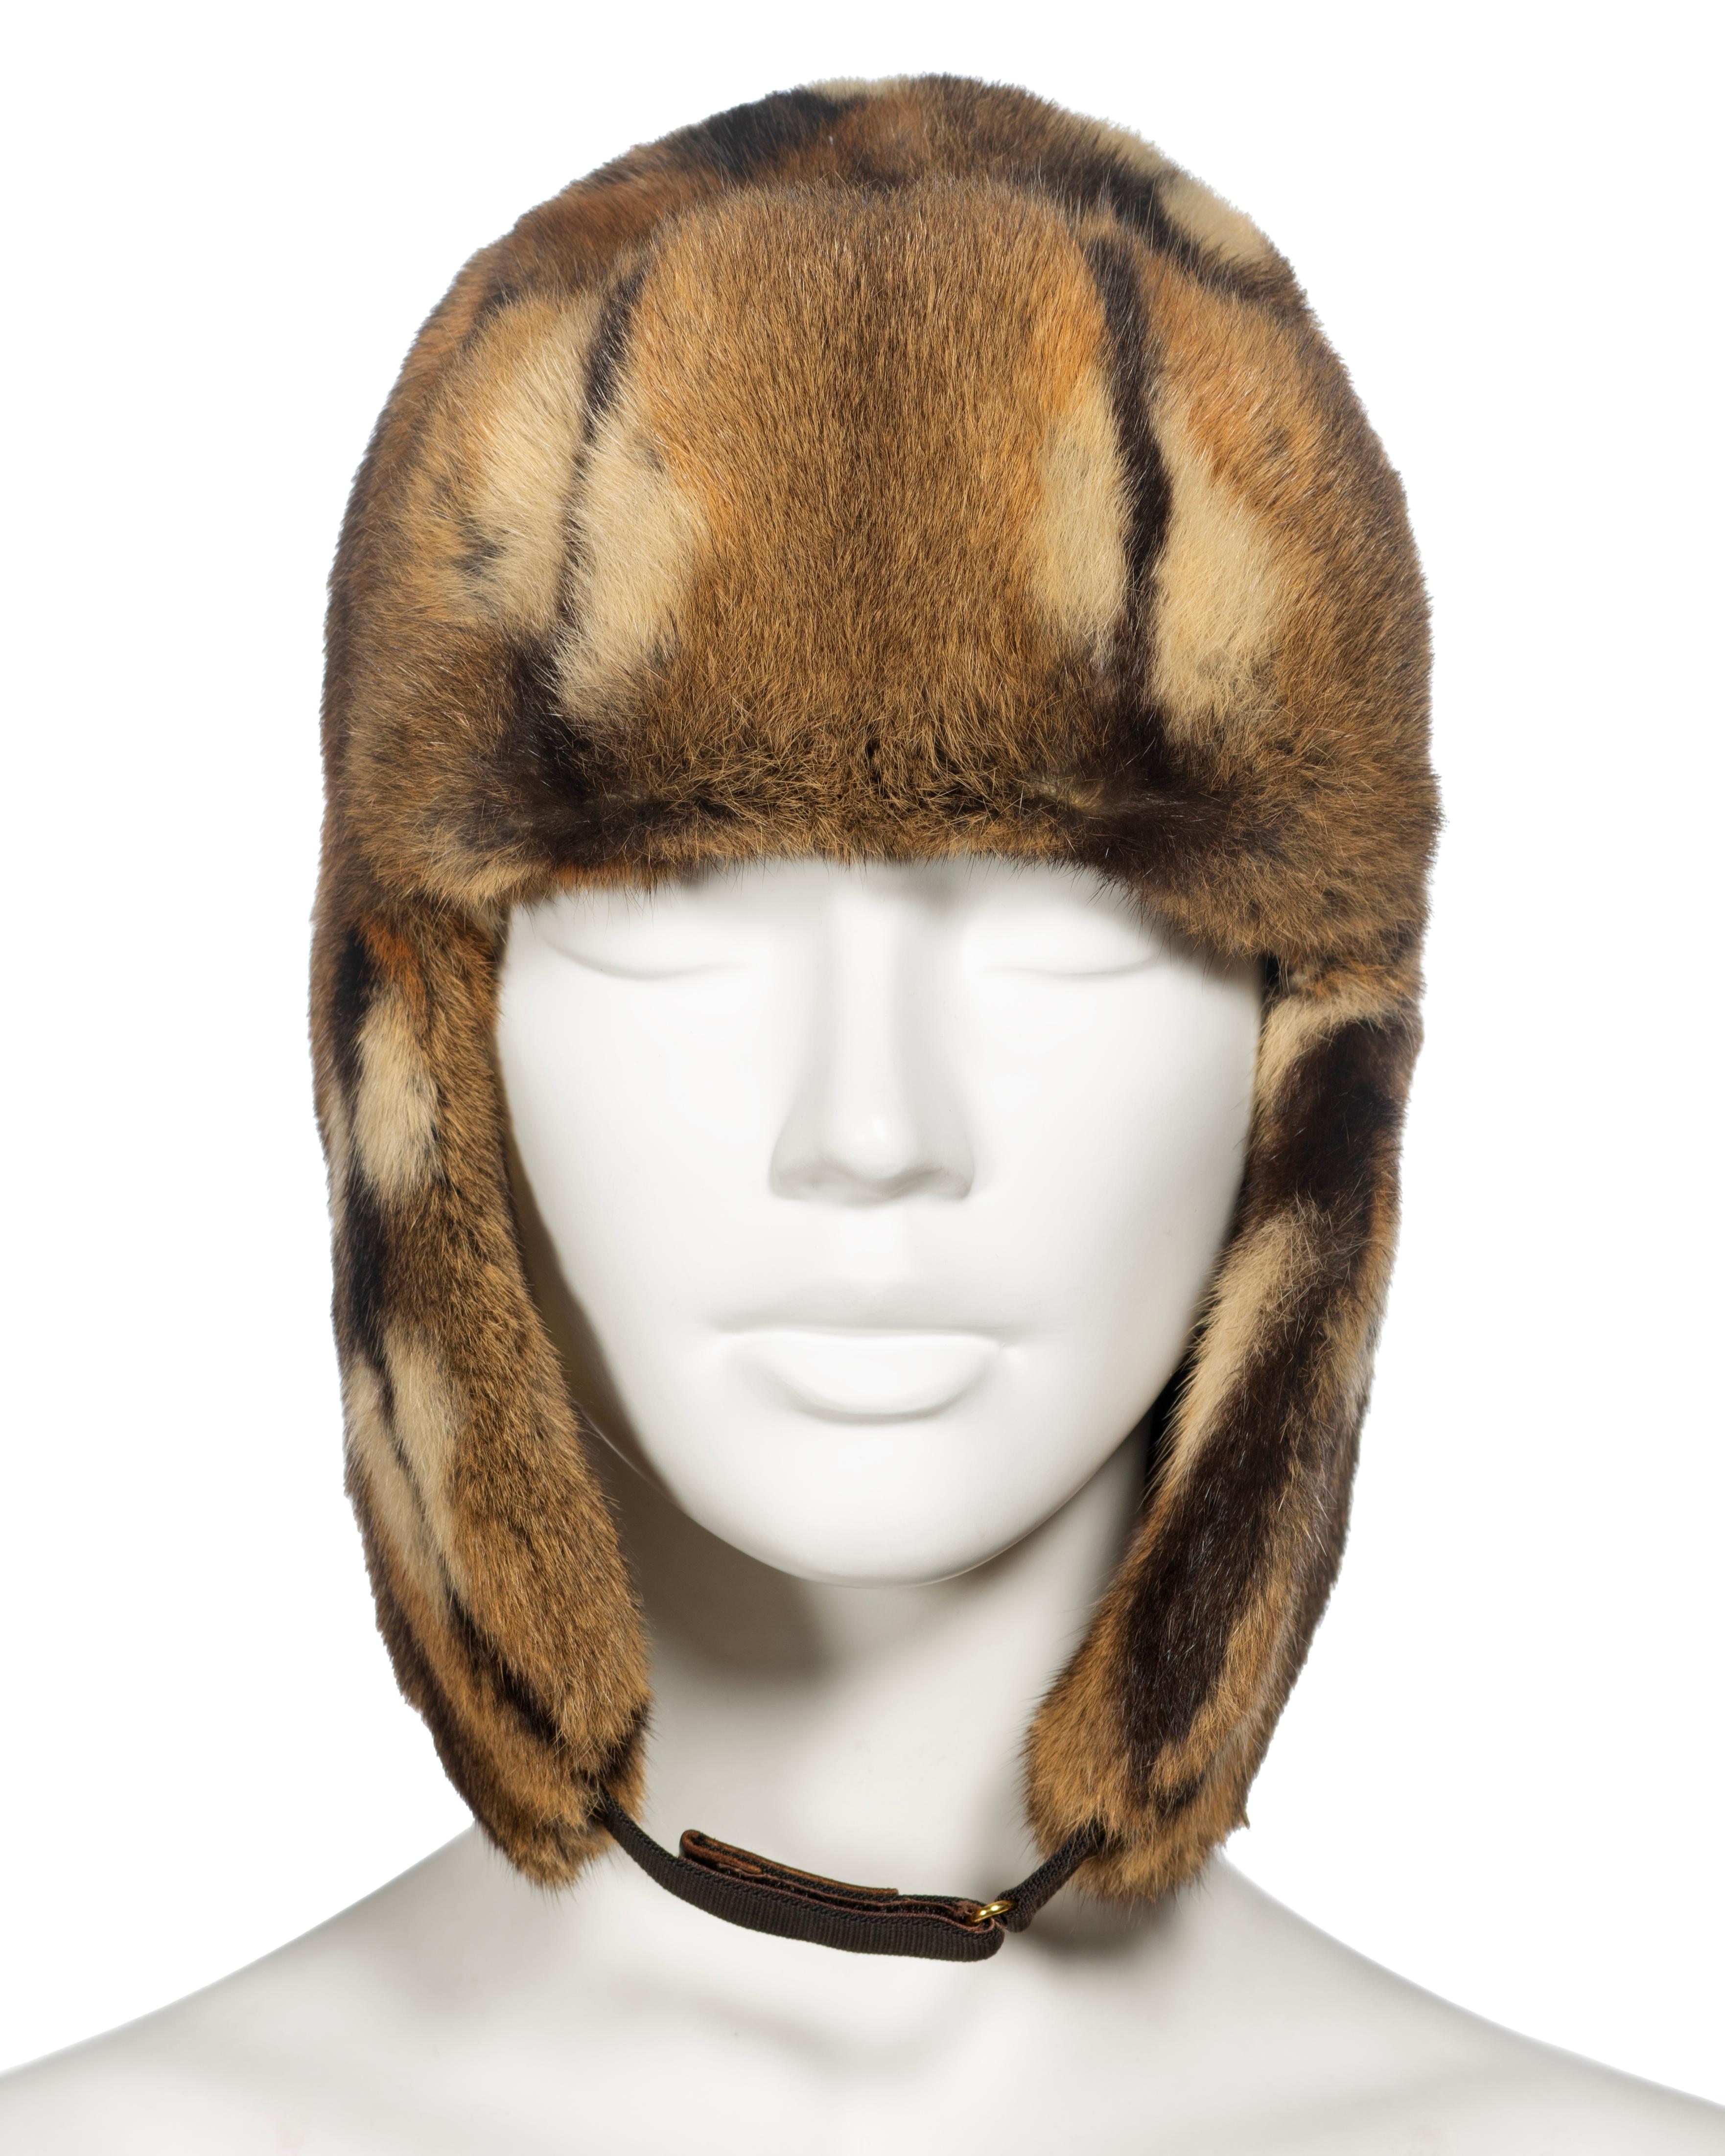 ▪ Gucci Fur Trapper Hat
▪ Creative Director: Tom Ford
▪ Fall-Winter 2000
▪ Sold by One of a Kind Archive
▪ Brindled multi-tone fur
▪ Brown leather strap with velcro fastening 
▪ Size: Small
▪ Made in Italy   

The photographs presented in this